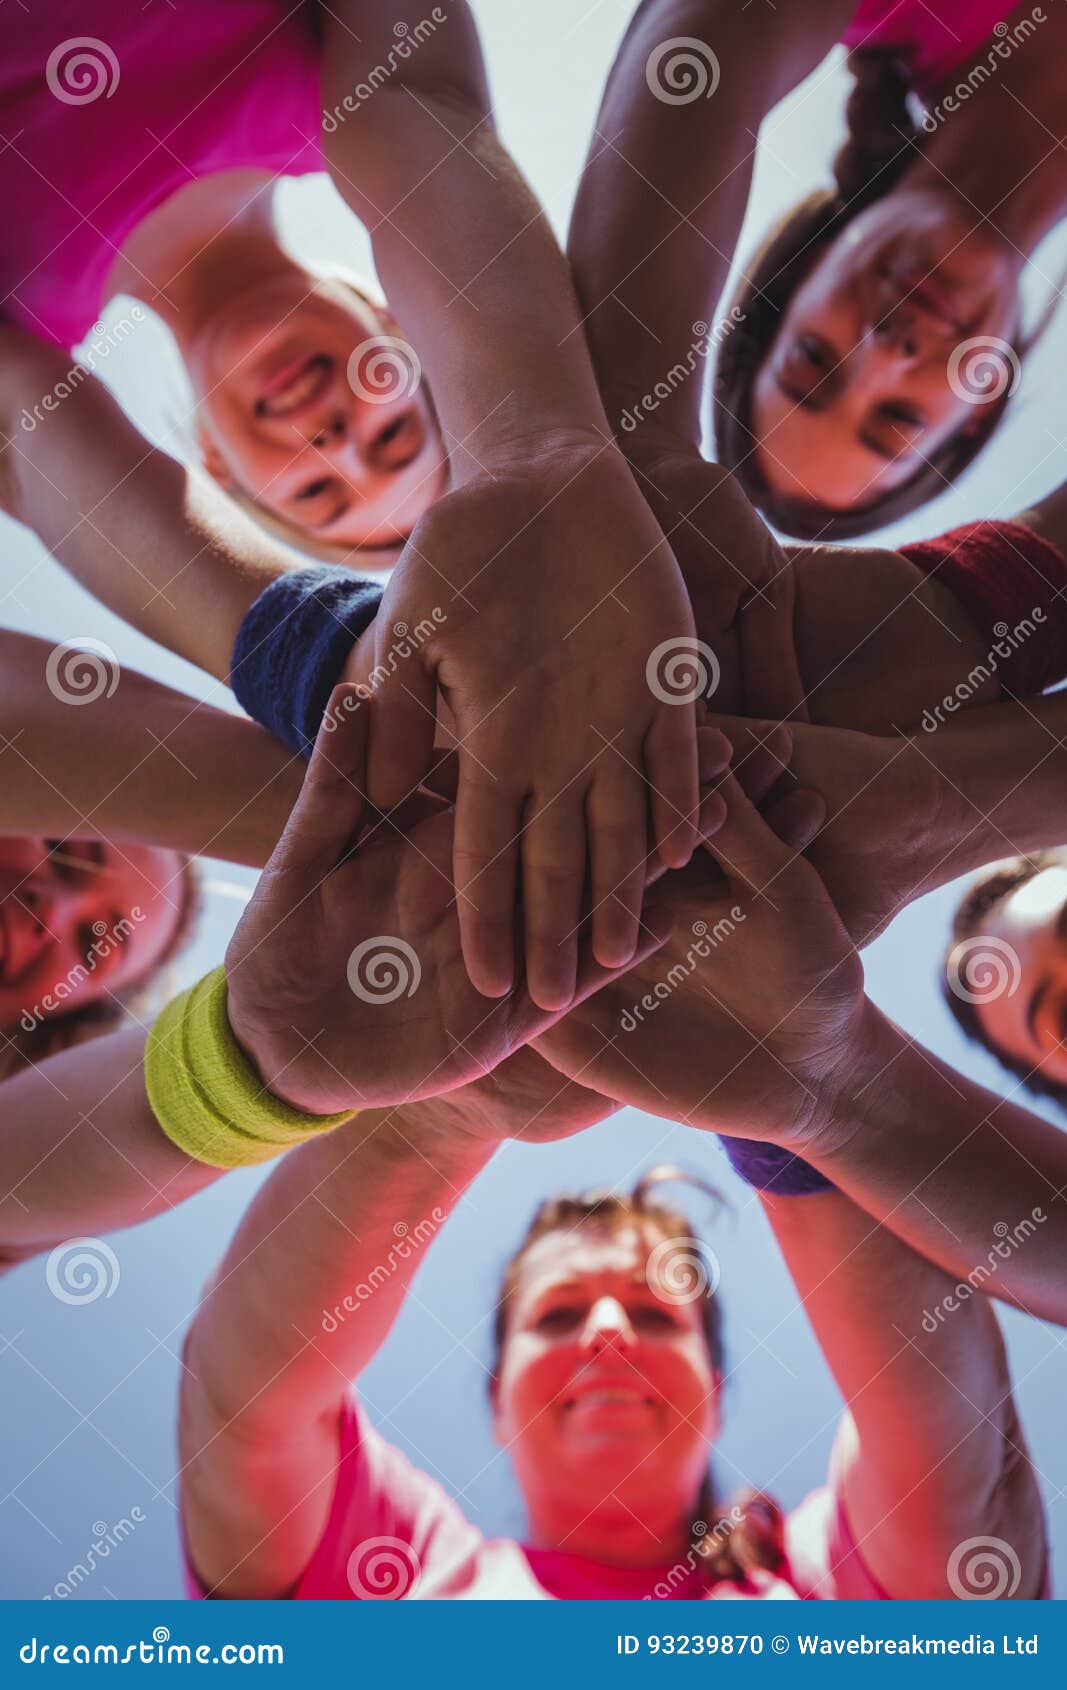 group of women forming hand stack in the boot camp